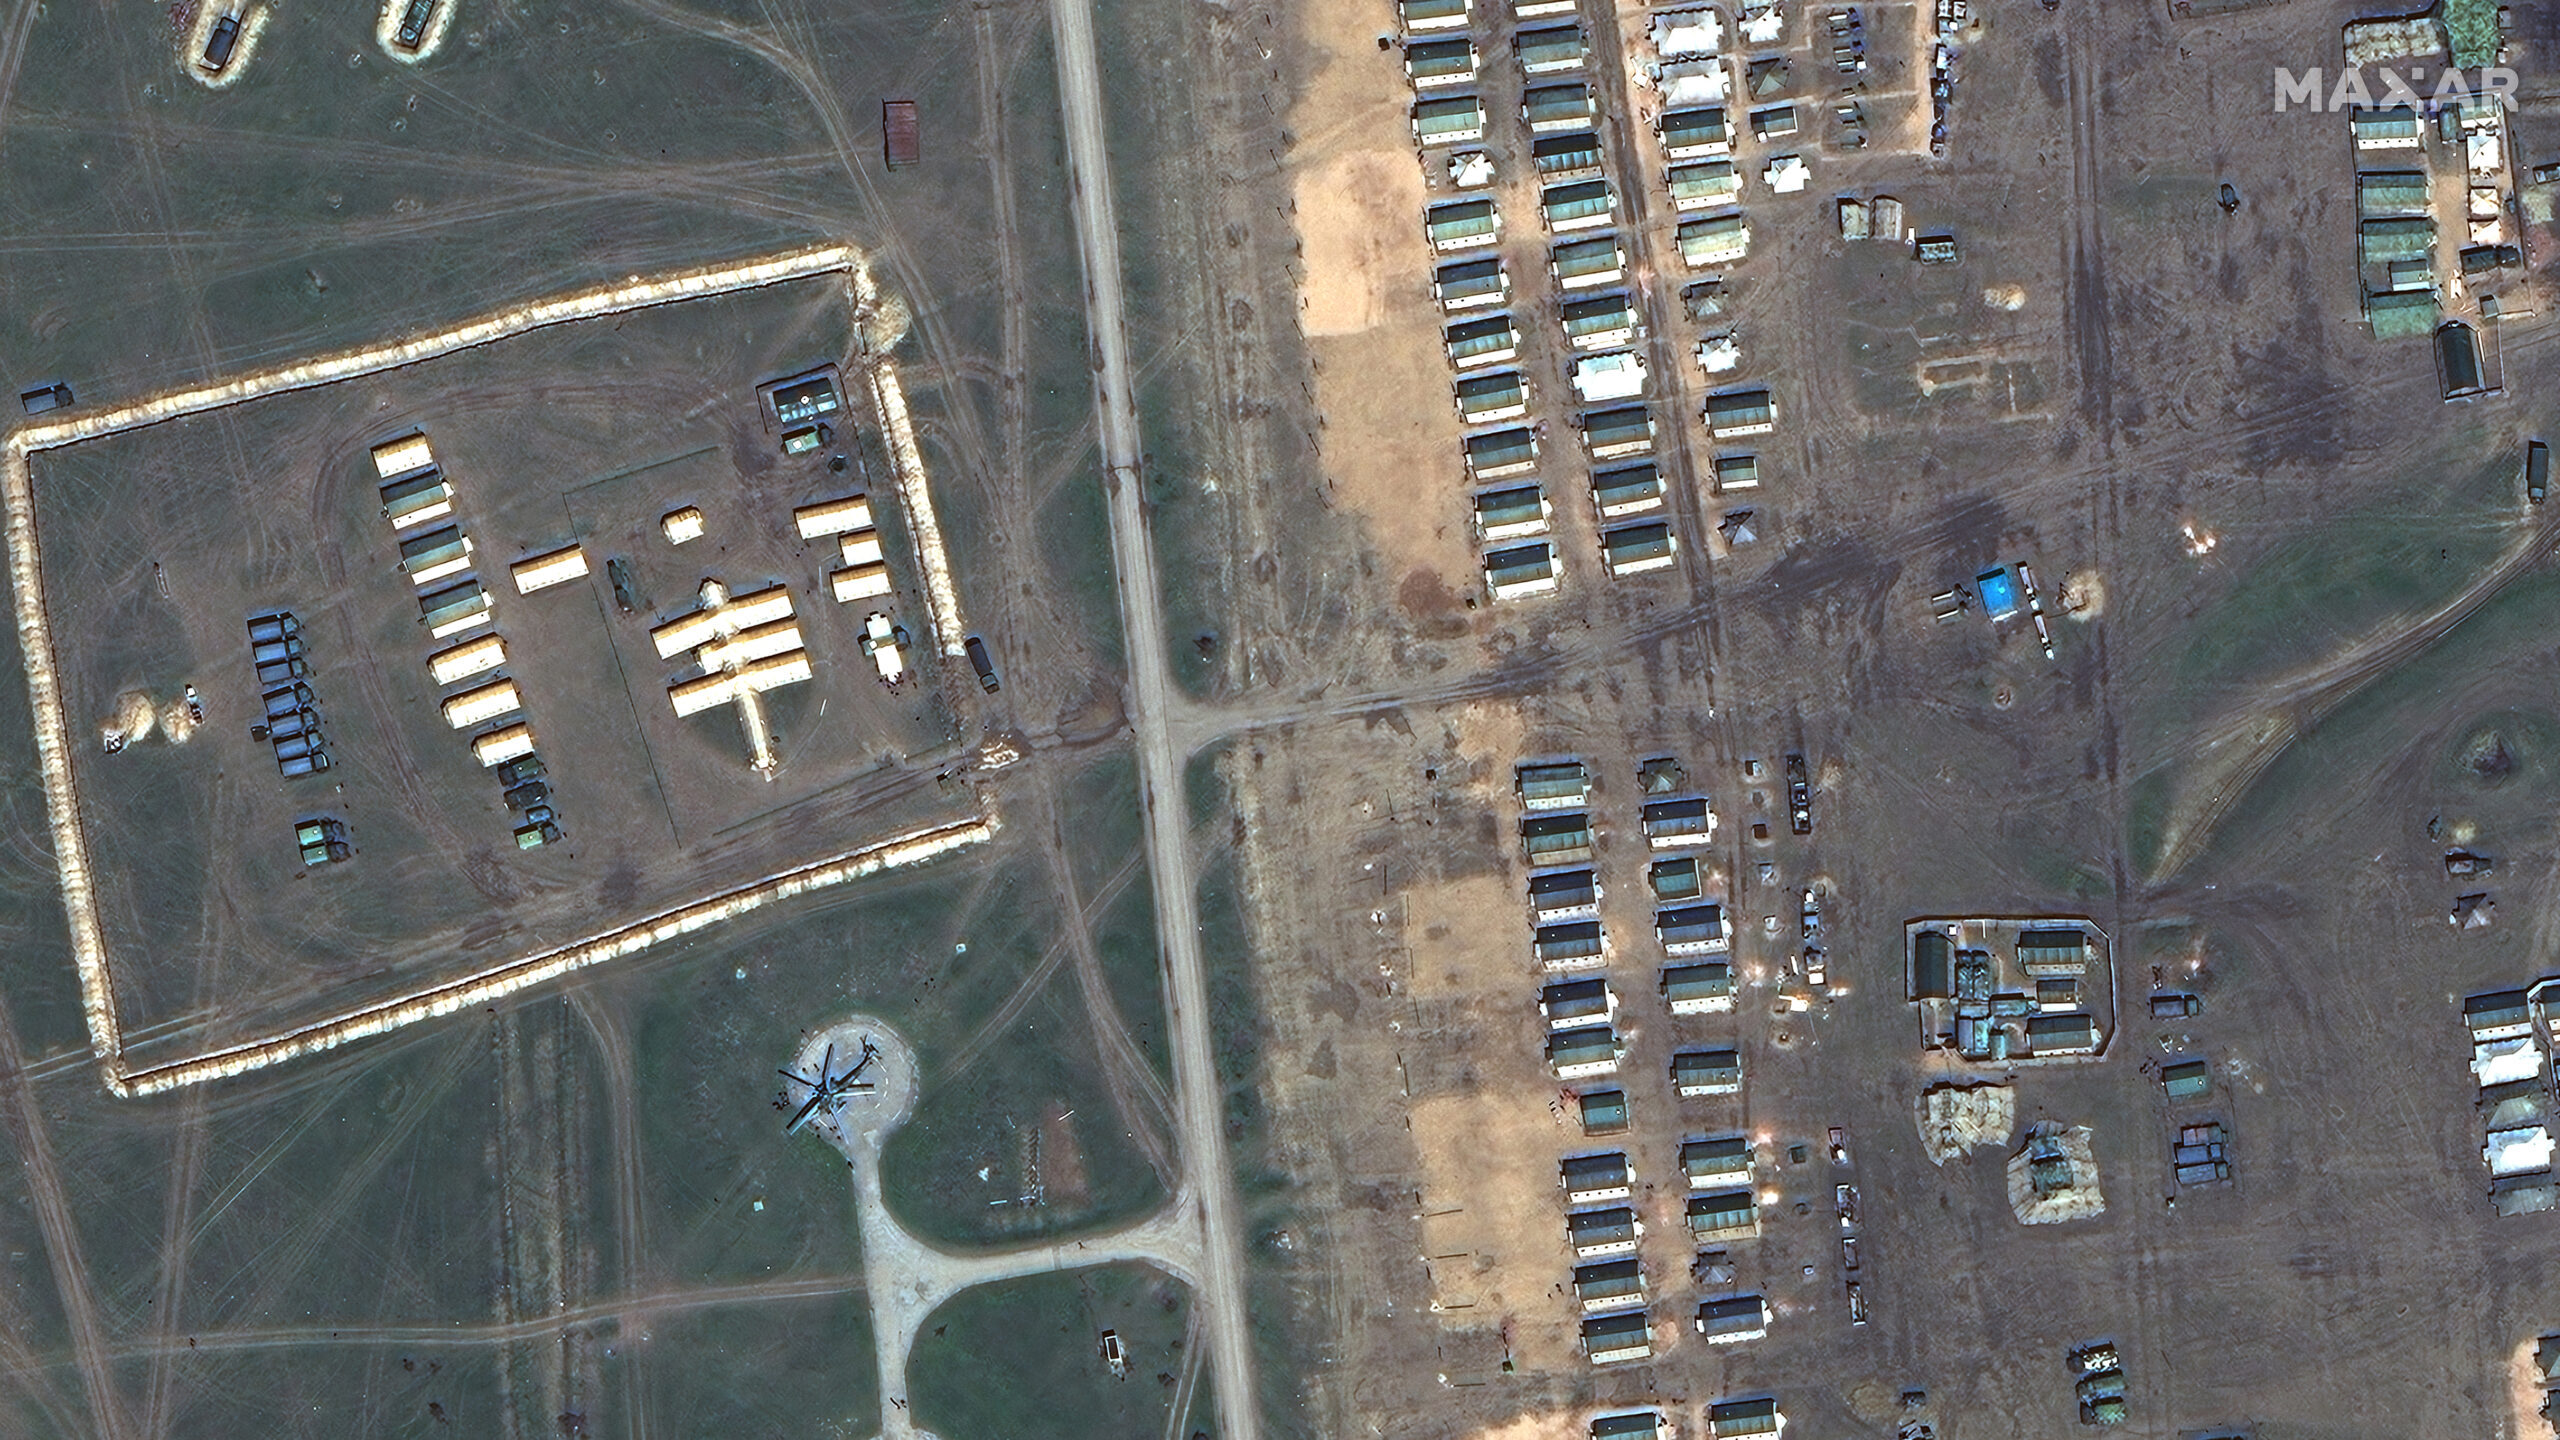 RUSSIAN TROOPS 02 — APRIL 15, 2021: 02 close up of field hospital and troop tents opuk tranining area crimea.